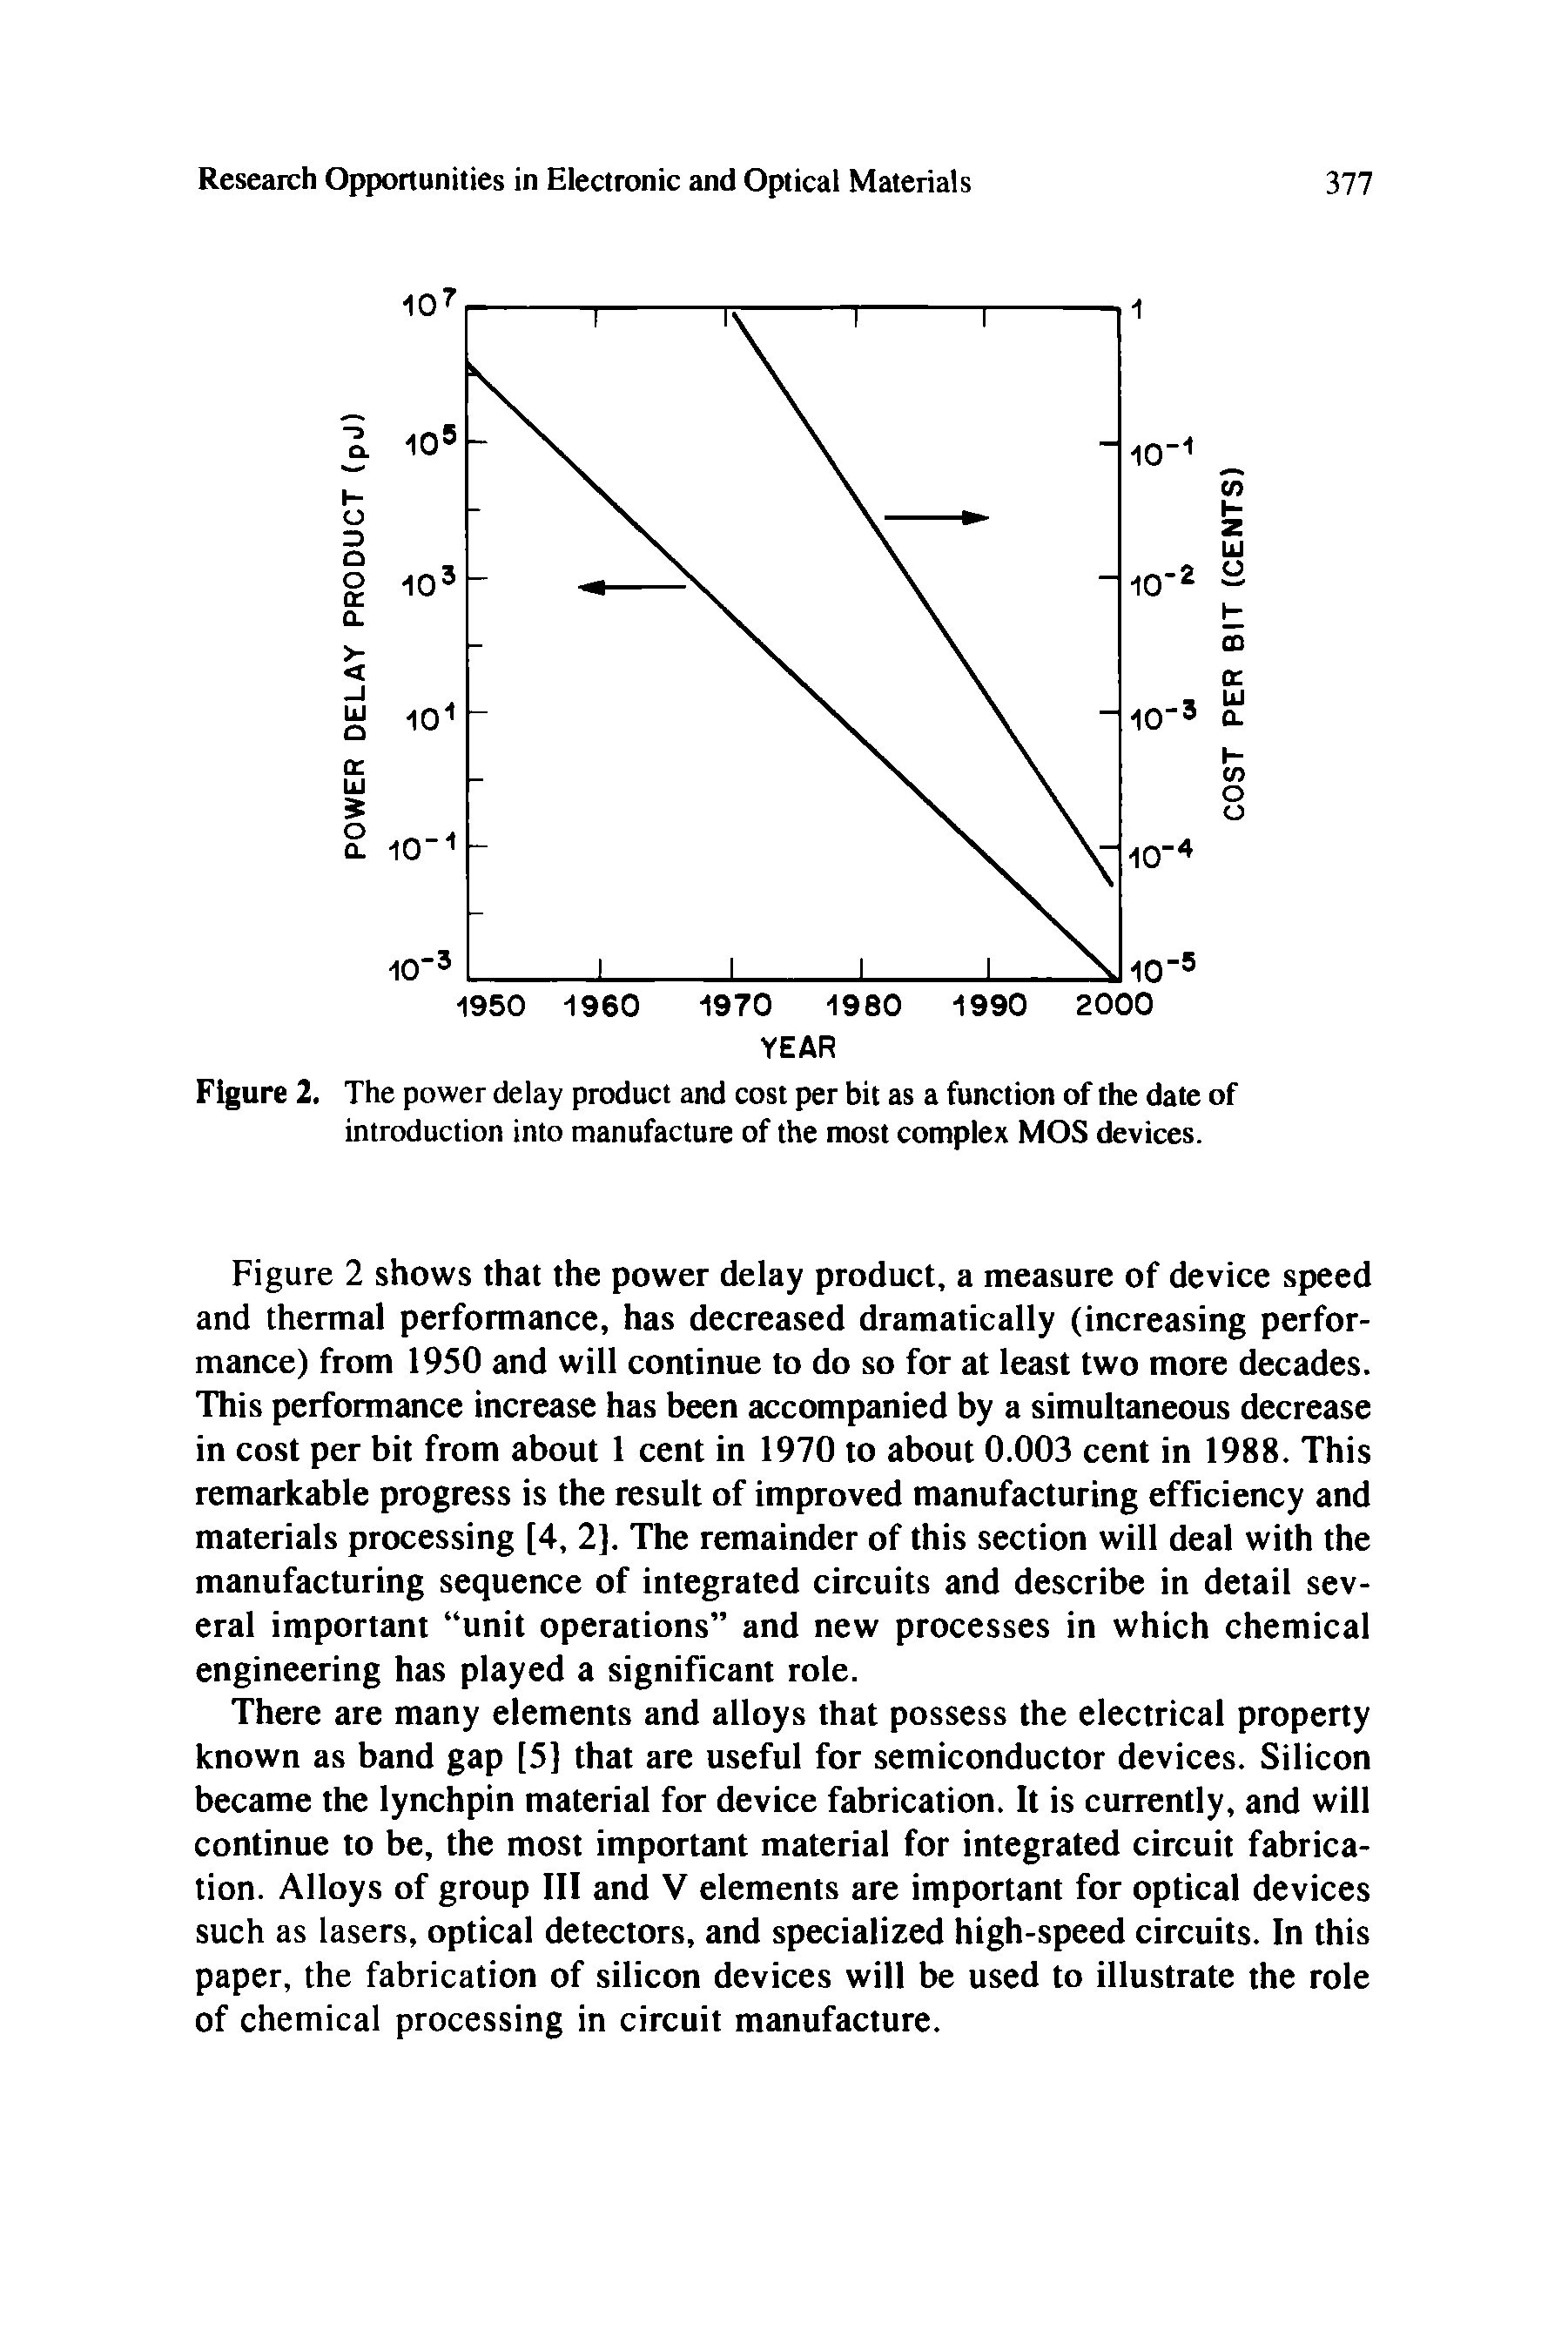 Figure 2. The power delay product and cost per bit as a function of the date of introduction into manufacture of the most complex MOS devices.